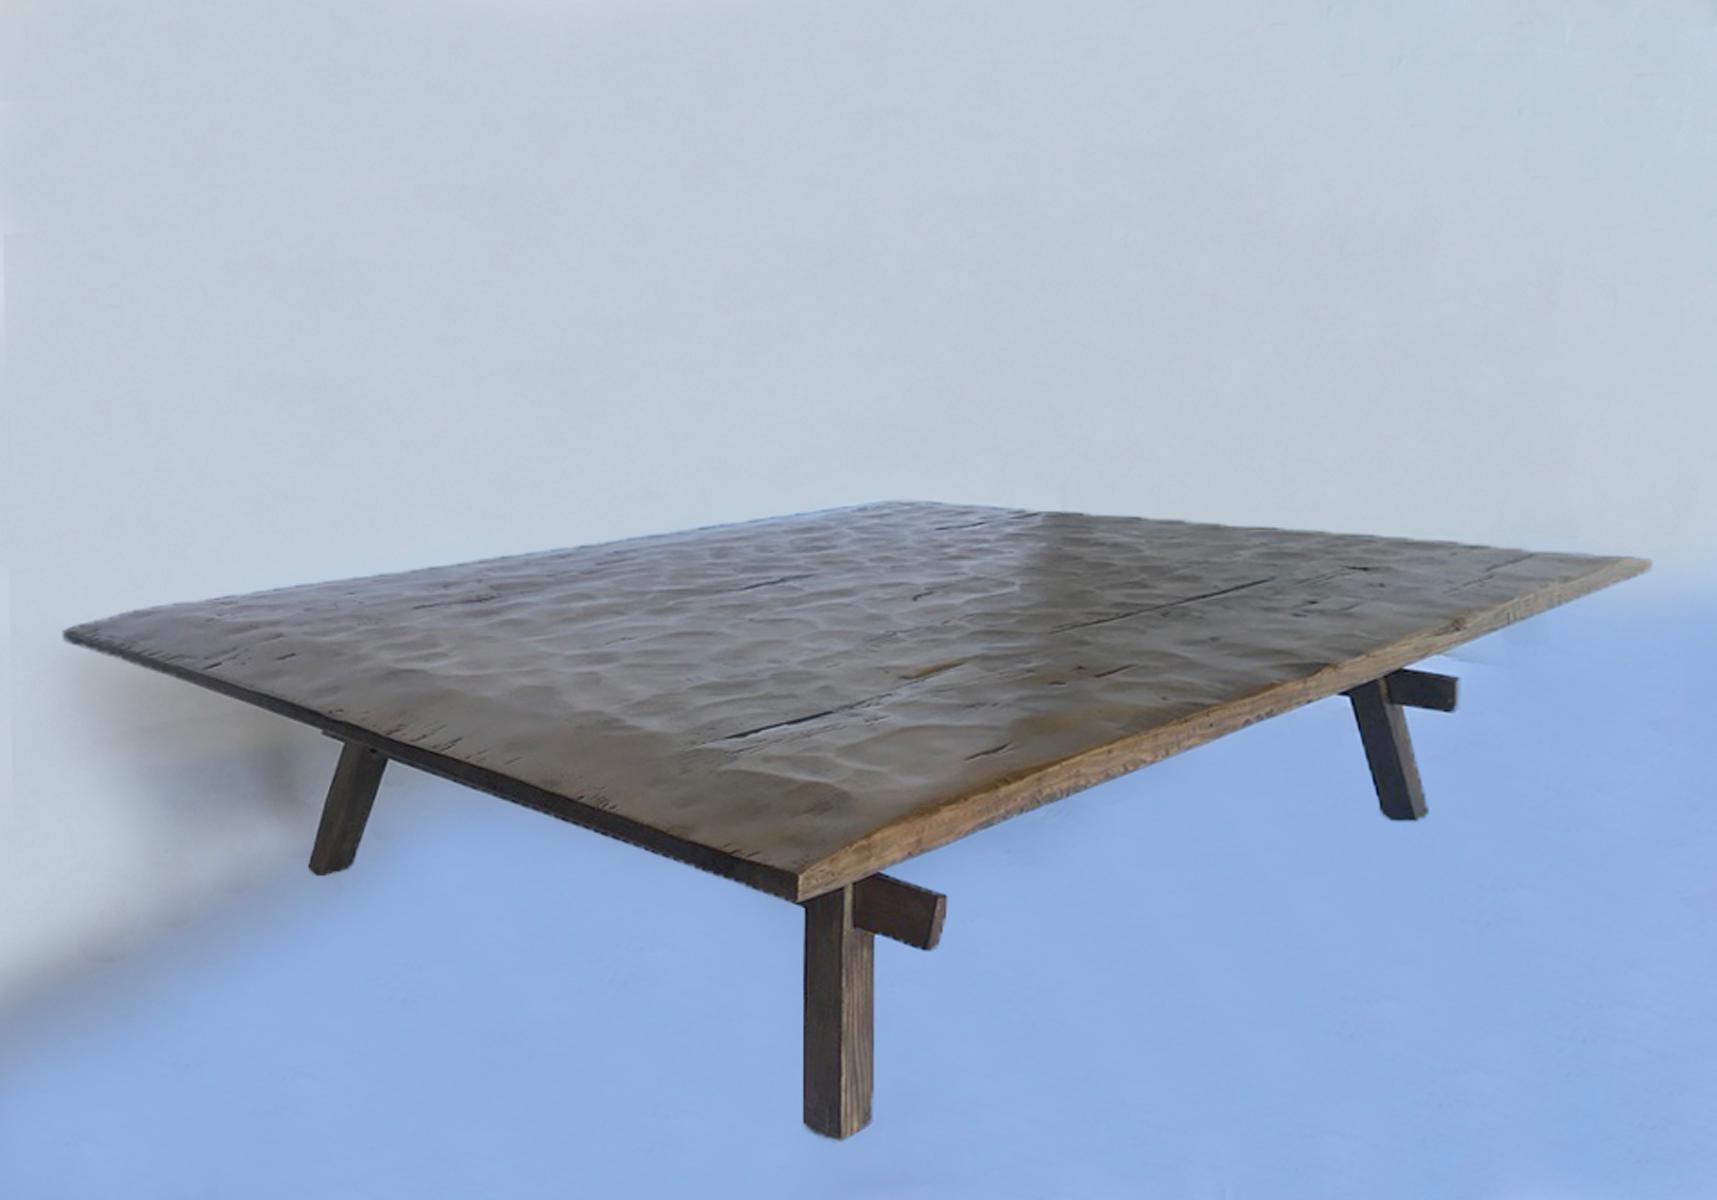 Thin profile coffee table based on a rustic antique table from Guatemala. The top is hand finished with a traditionally hand hewn top and distressed to add character. This table can be made in any size and with a variety of finishes. Made in Los